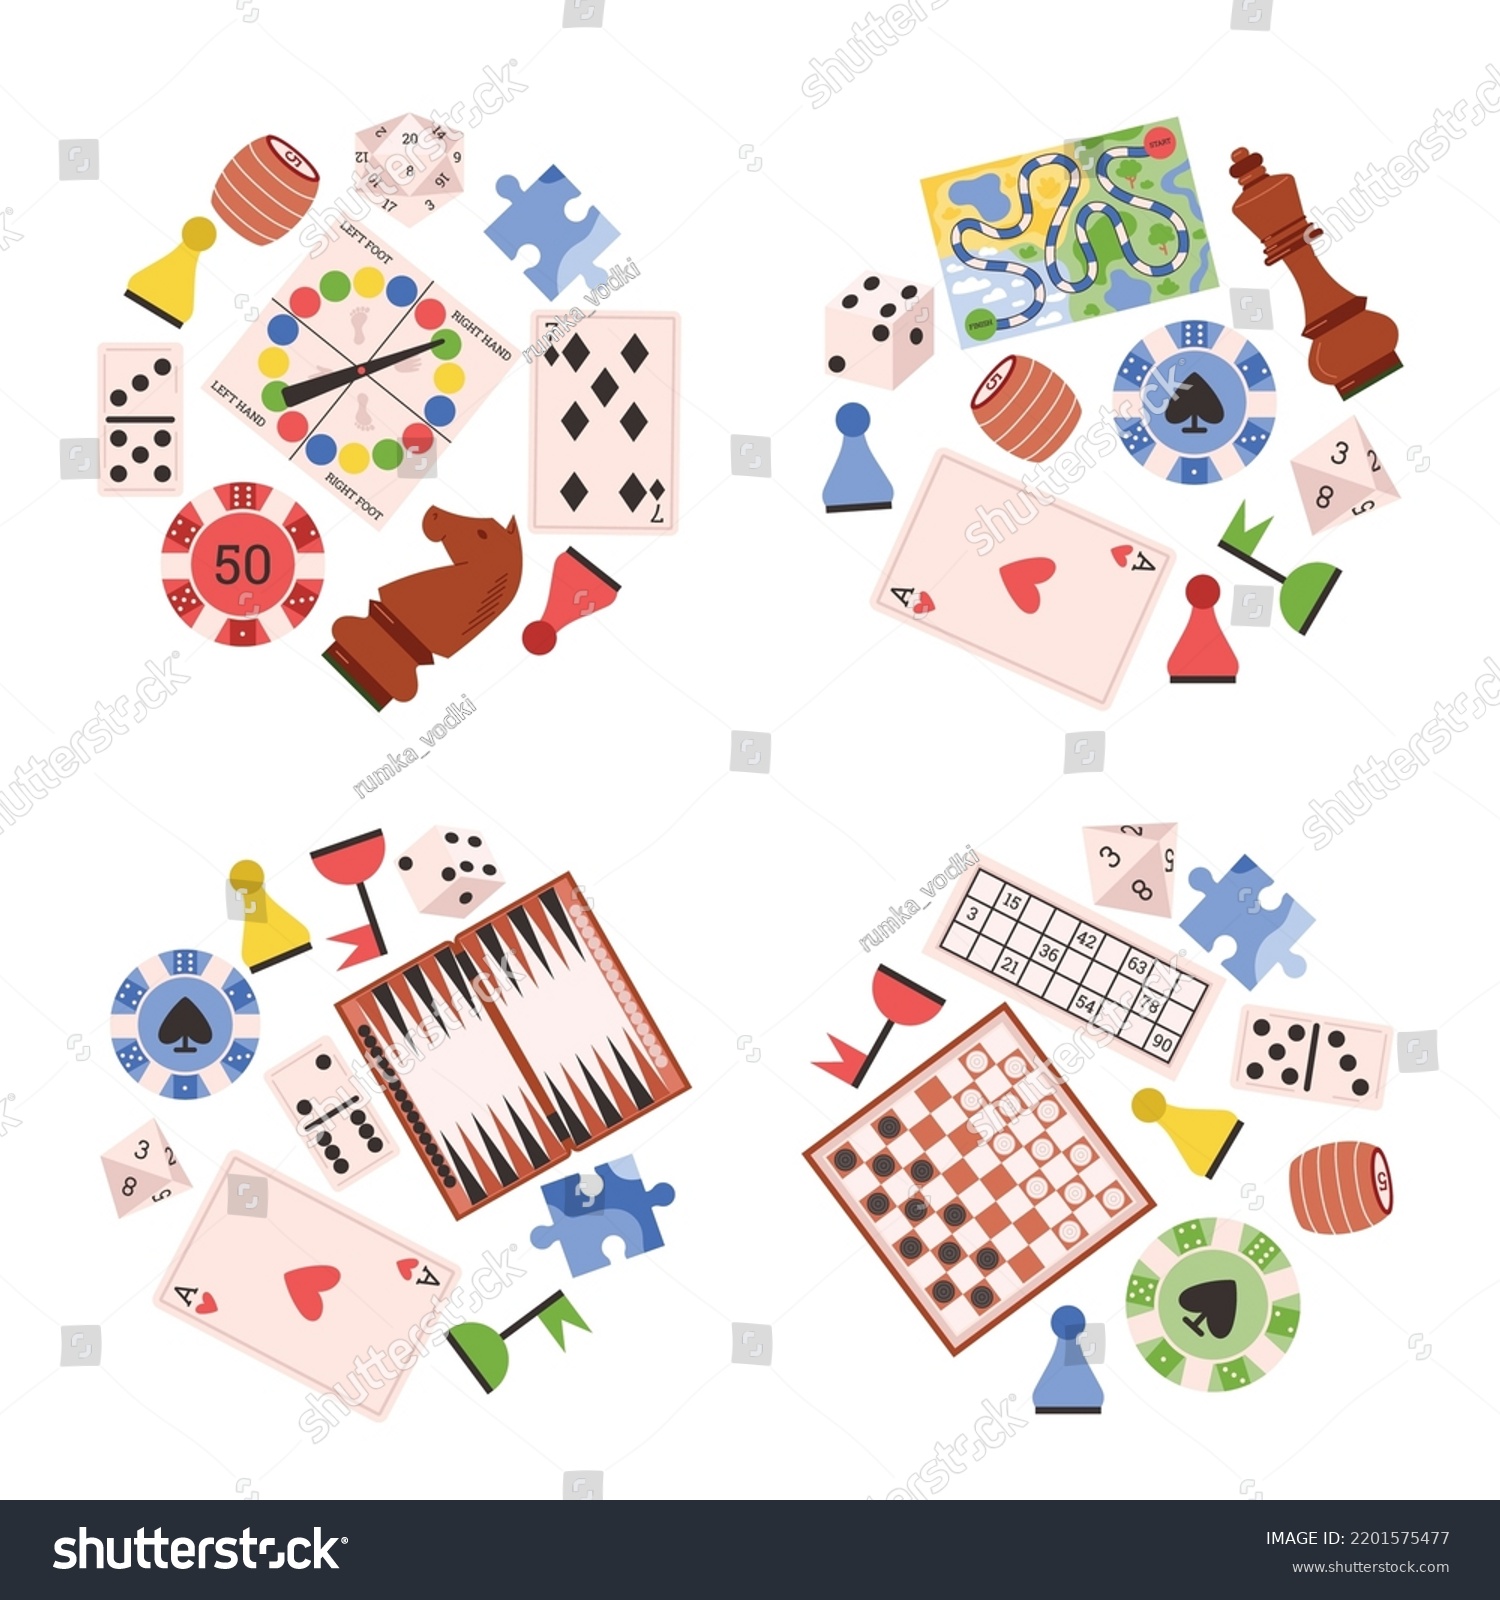 SVG of Set of board games elements, flat vector illustration isolated on white background. Chess pieces, cards, checkers, dominoes, lotto and backgammon. Table games for kids and adults. Family game party. svg